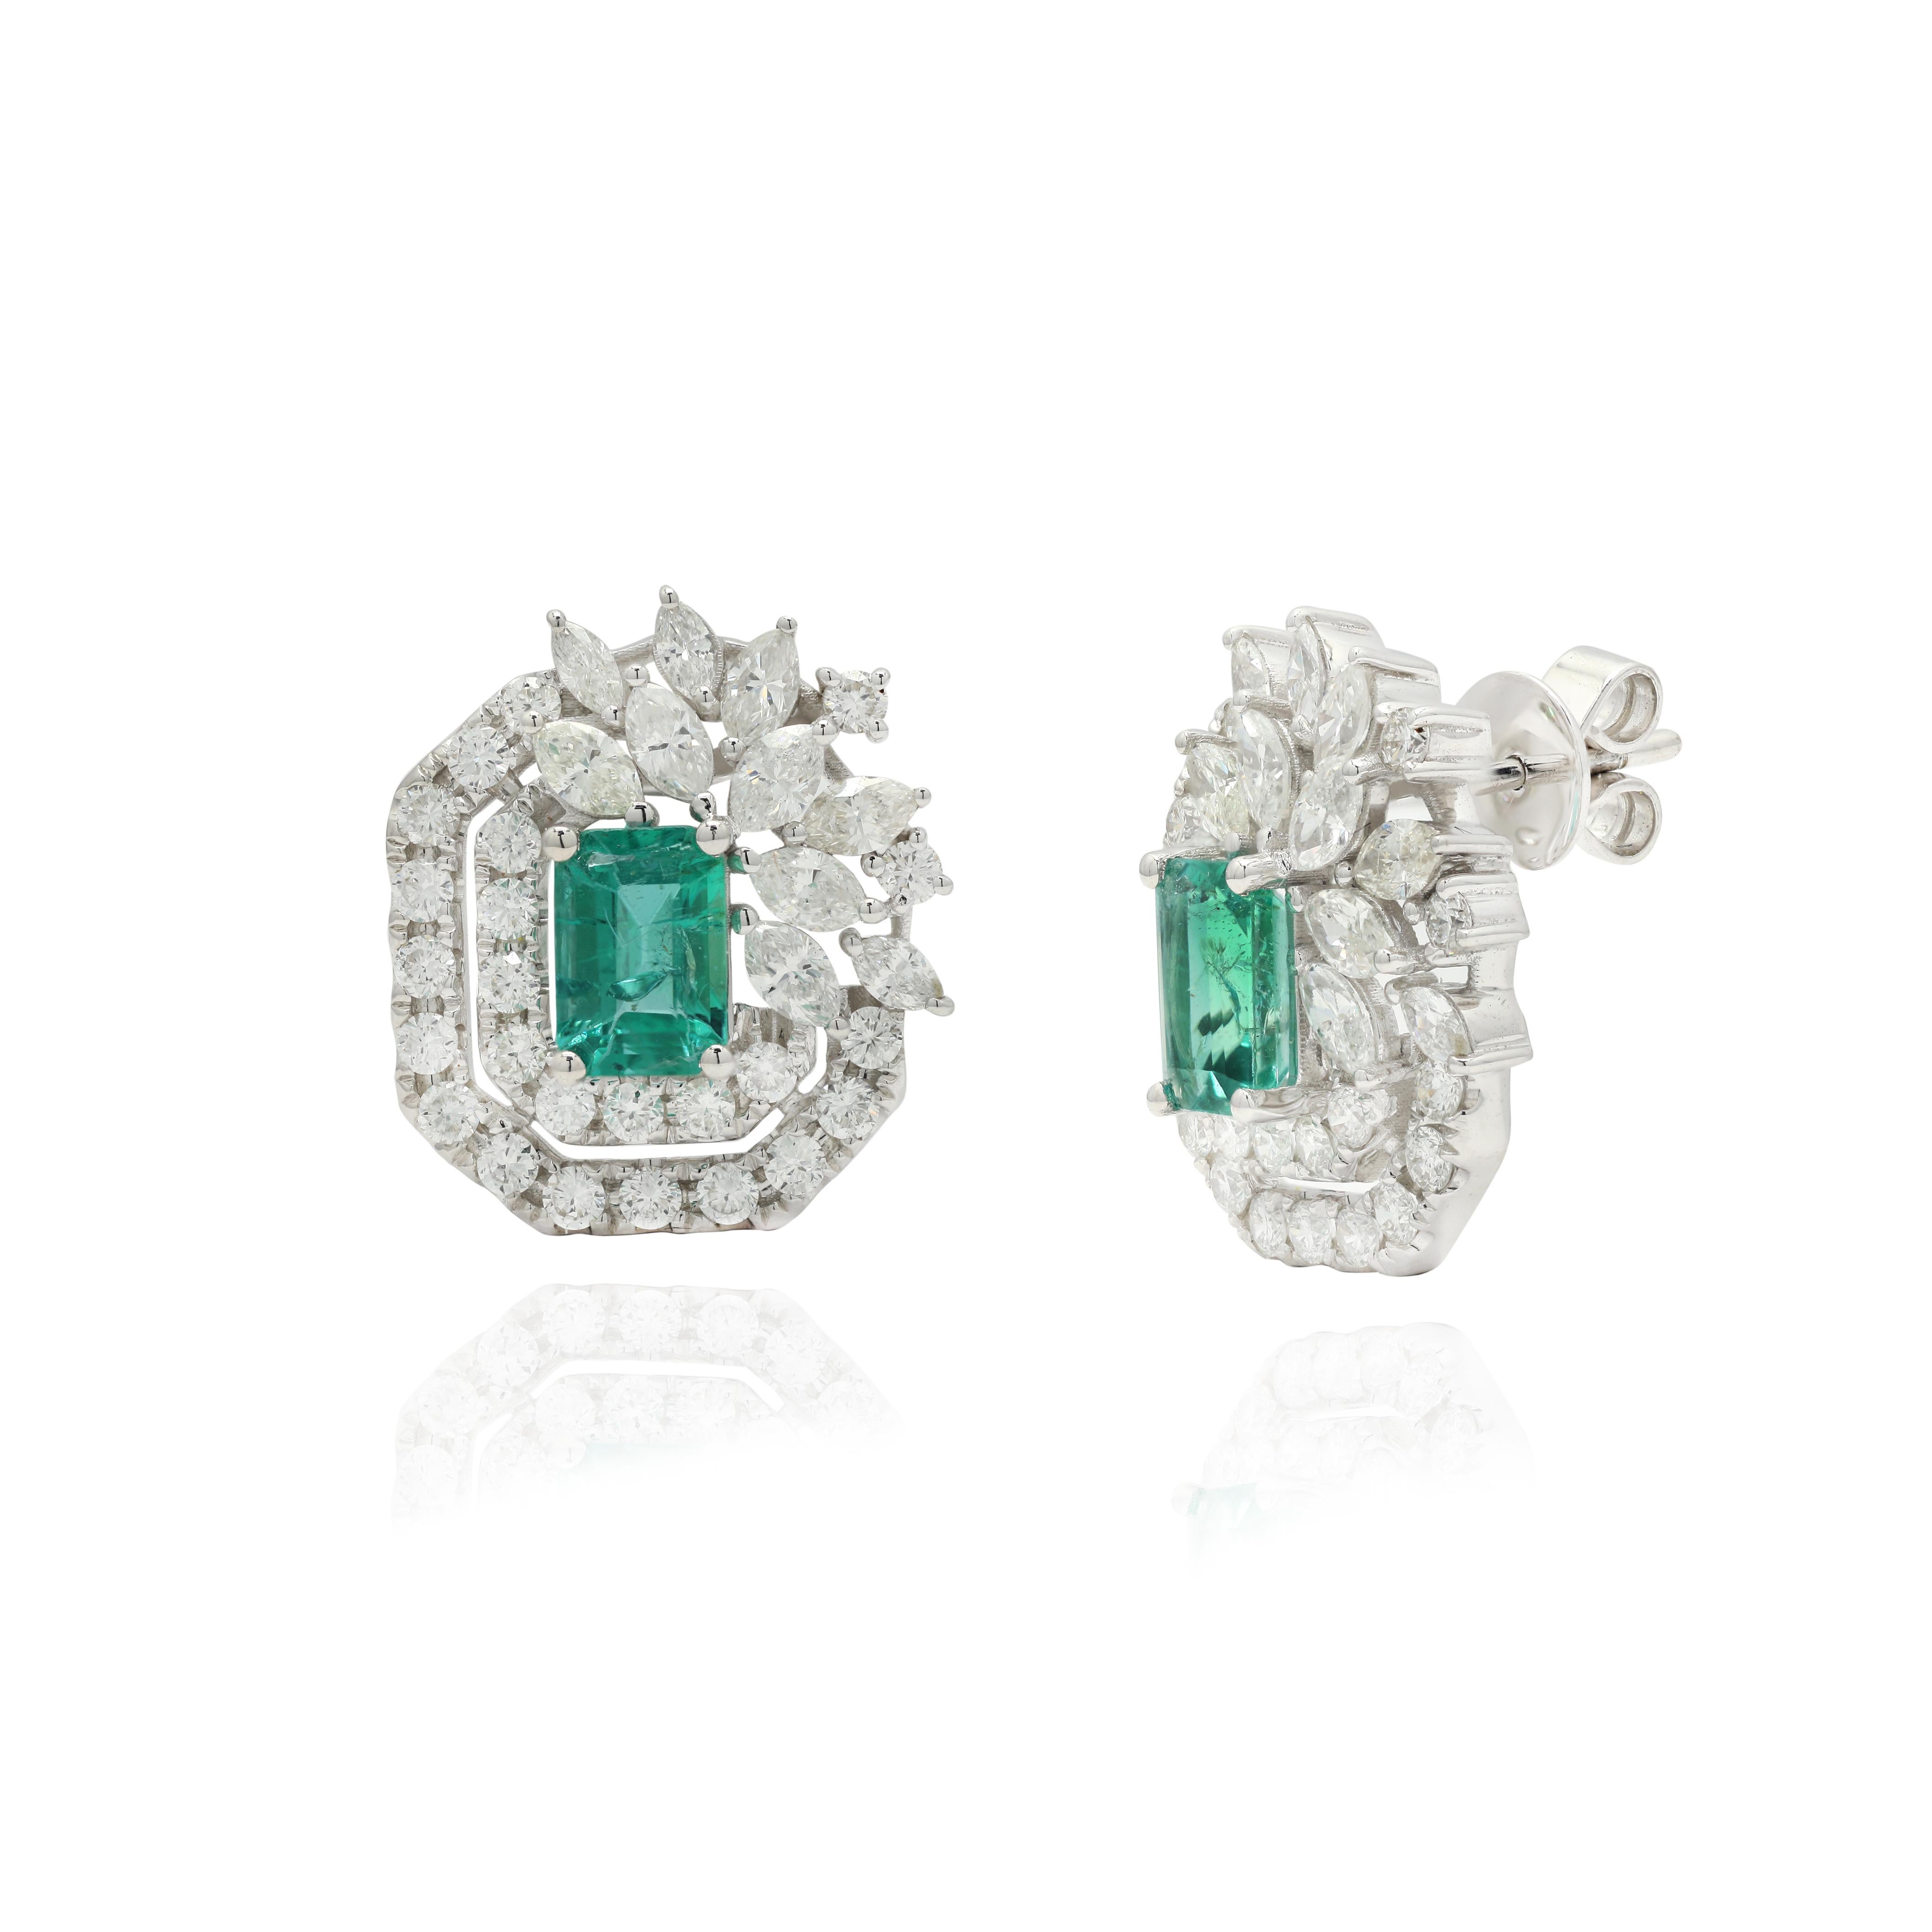 Studs create a subtle beauty while showcasing the colors of the natural precious gemstones and illuminating diamonds making a statement.
Floral Emerald with diamonds stud earrings in 14K gold. Embrace your look with these stunning pair of earrings